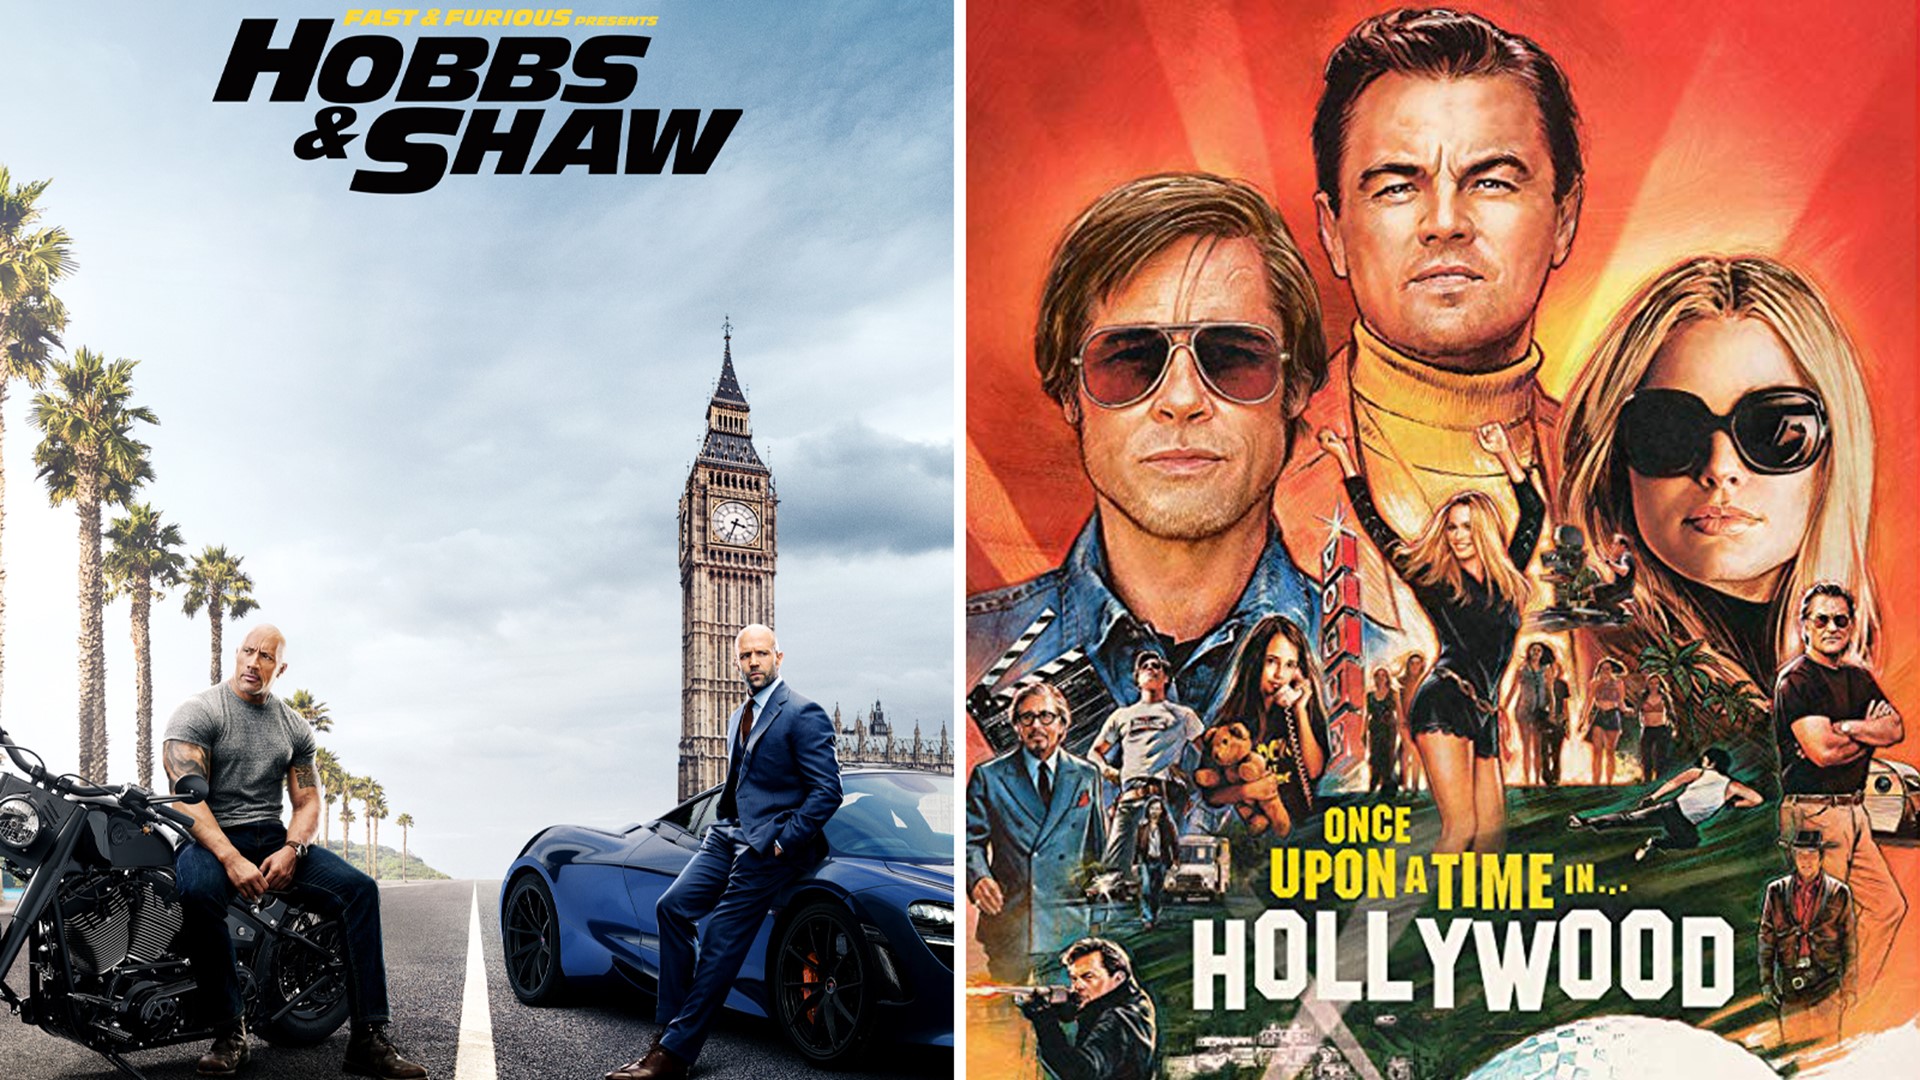 Extra Butter reviews the new movie 'Hobbs & Shaw,' the latest in the 'Fast & Furious' franchise. Hear from Dwayne Johnson about filming in Hawaii. Plus, the cast of 'Once Upon a Time in Hollywood.'